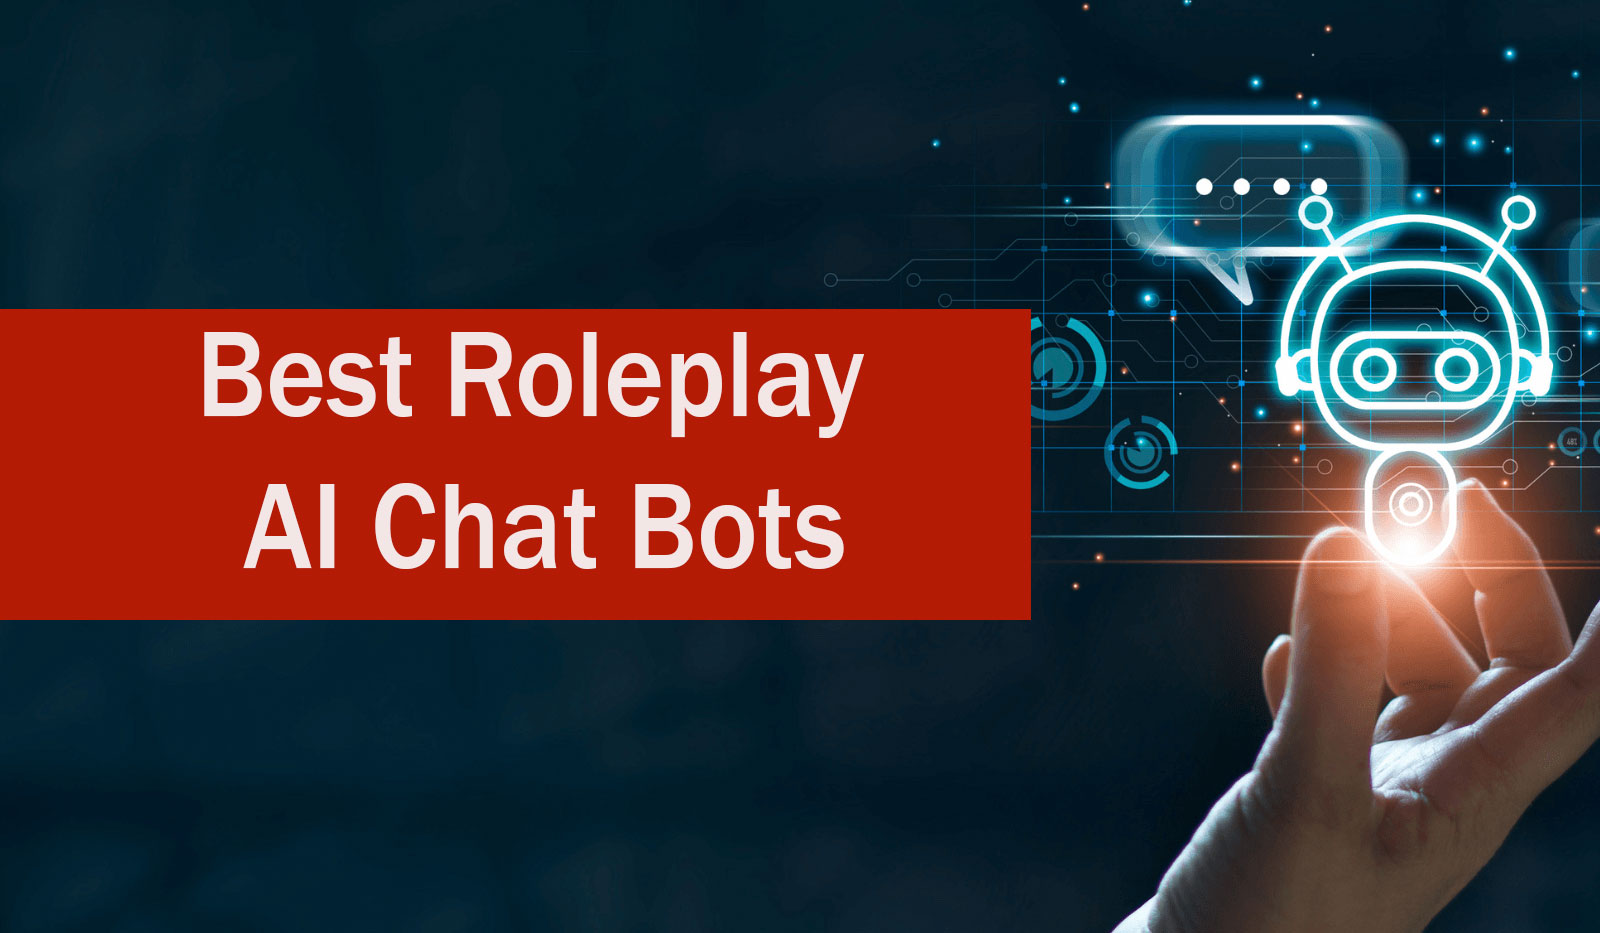 Best Roleplay AI Chat Bots